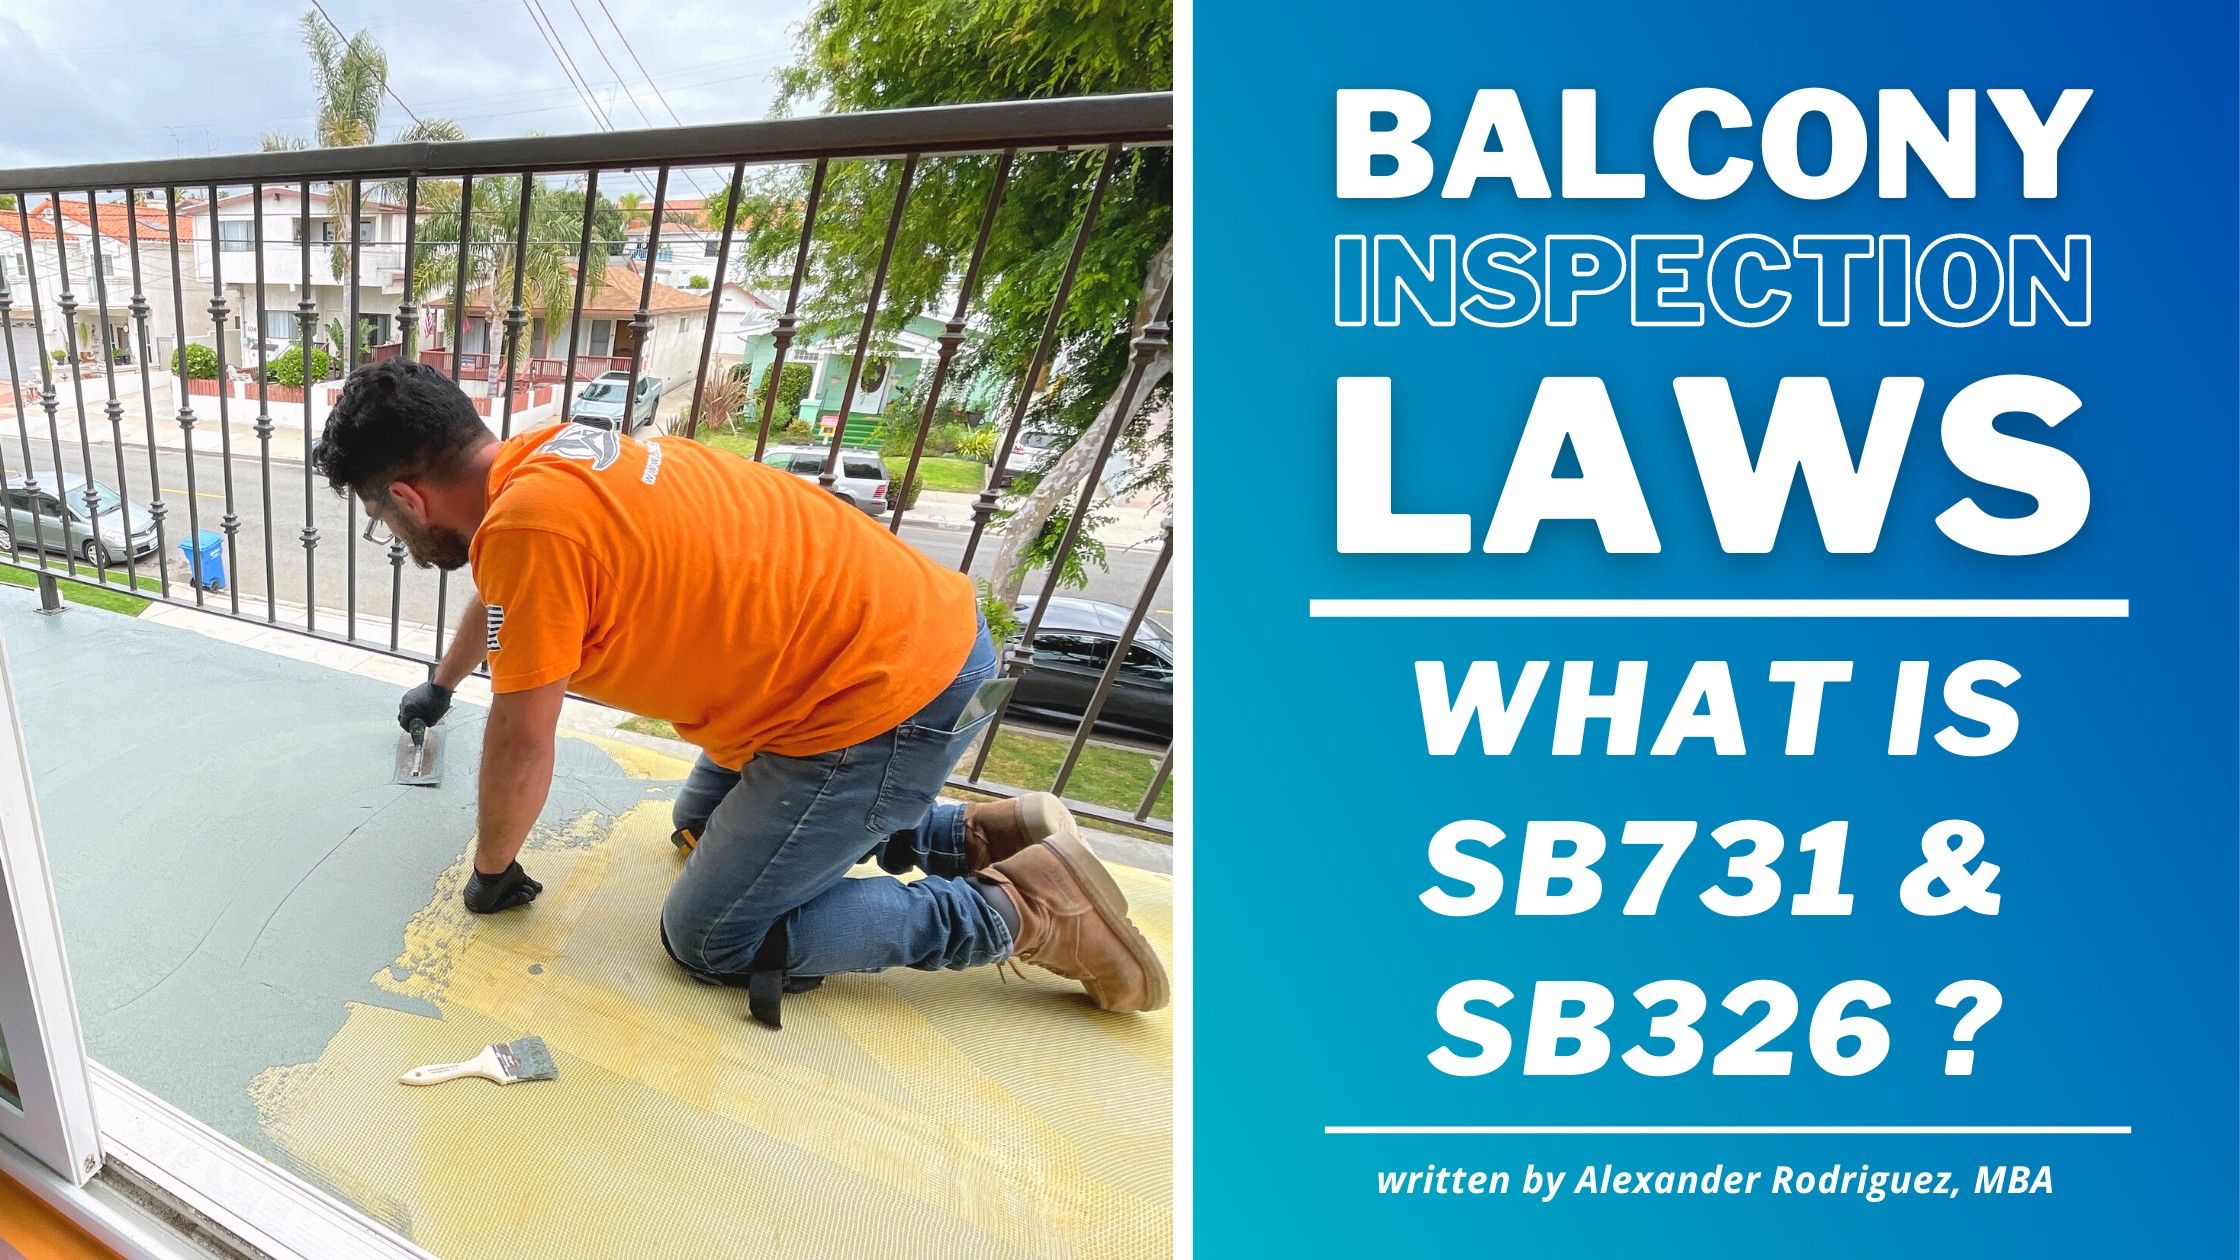 California Balcony Inspection Laws: What is SB 326 & SB 721?